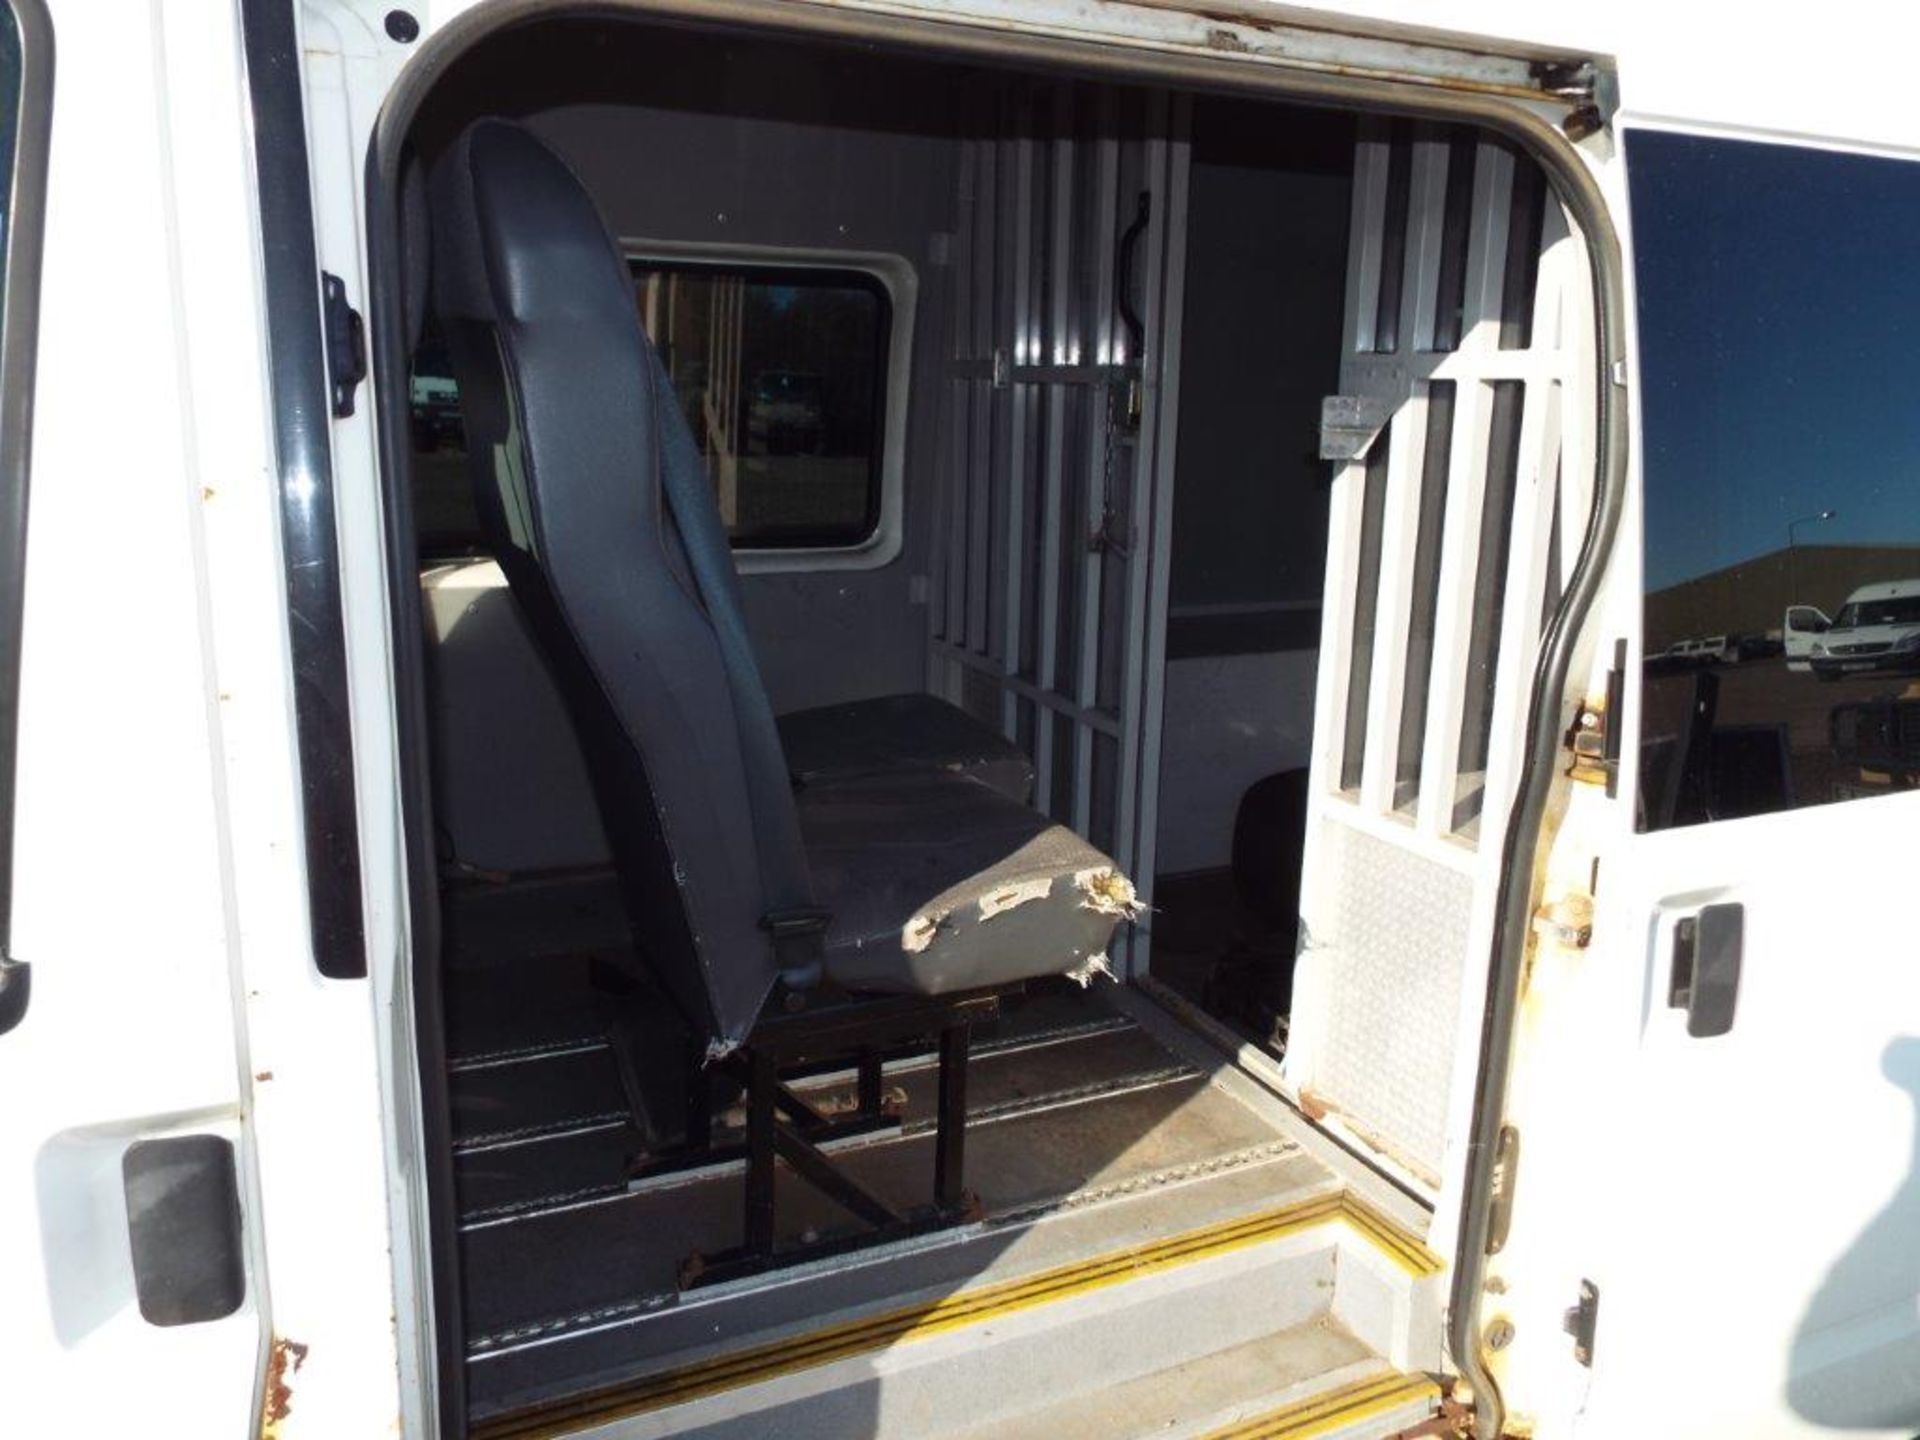 Ford Transit 330 SWB Crew Cab Panel Van with Rear Security Cage - Image 12 of 26